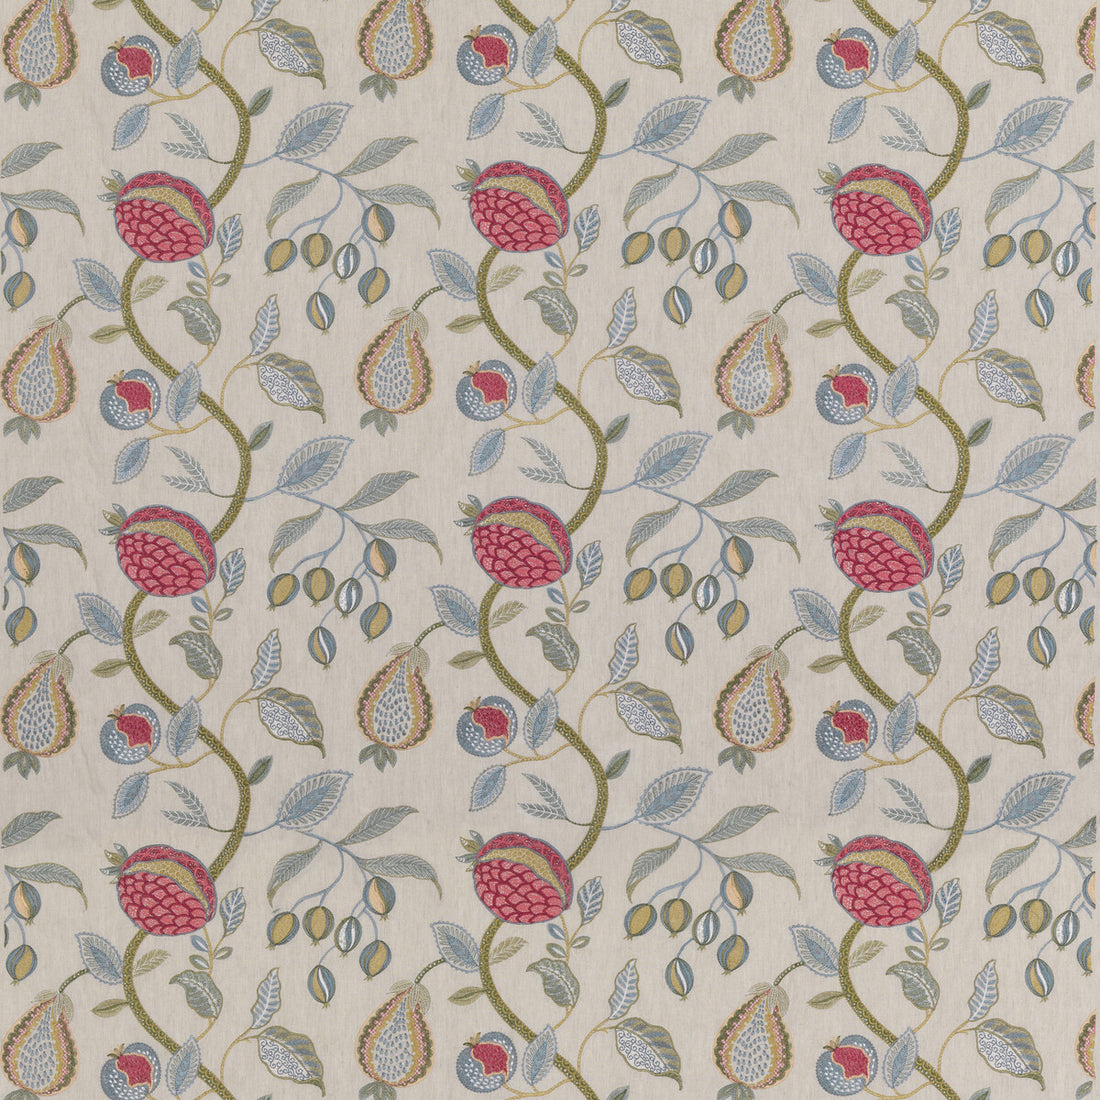 Kelling fabric in antique color - pattern BF11024.1.0 - by G P &amp; J Baker in the Burford collection